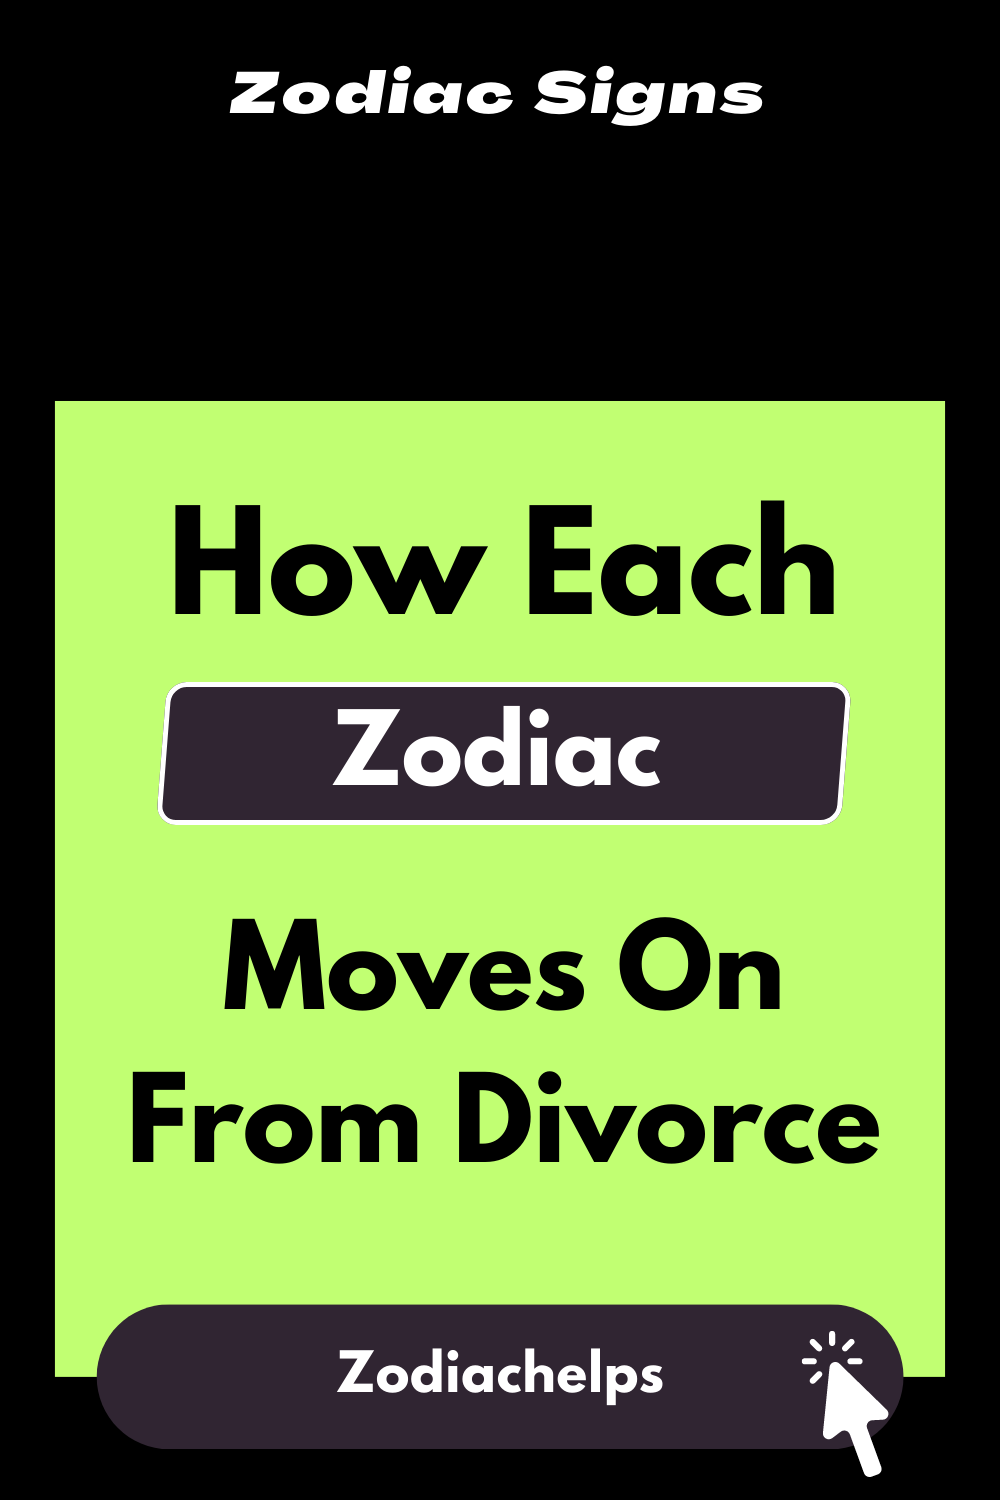 How Each Zodiac Moves On From Divorce